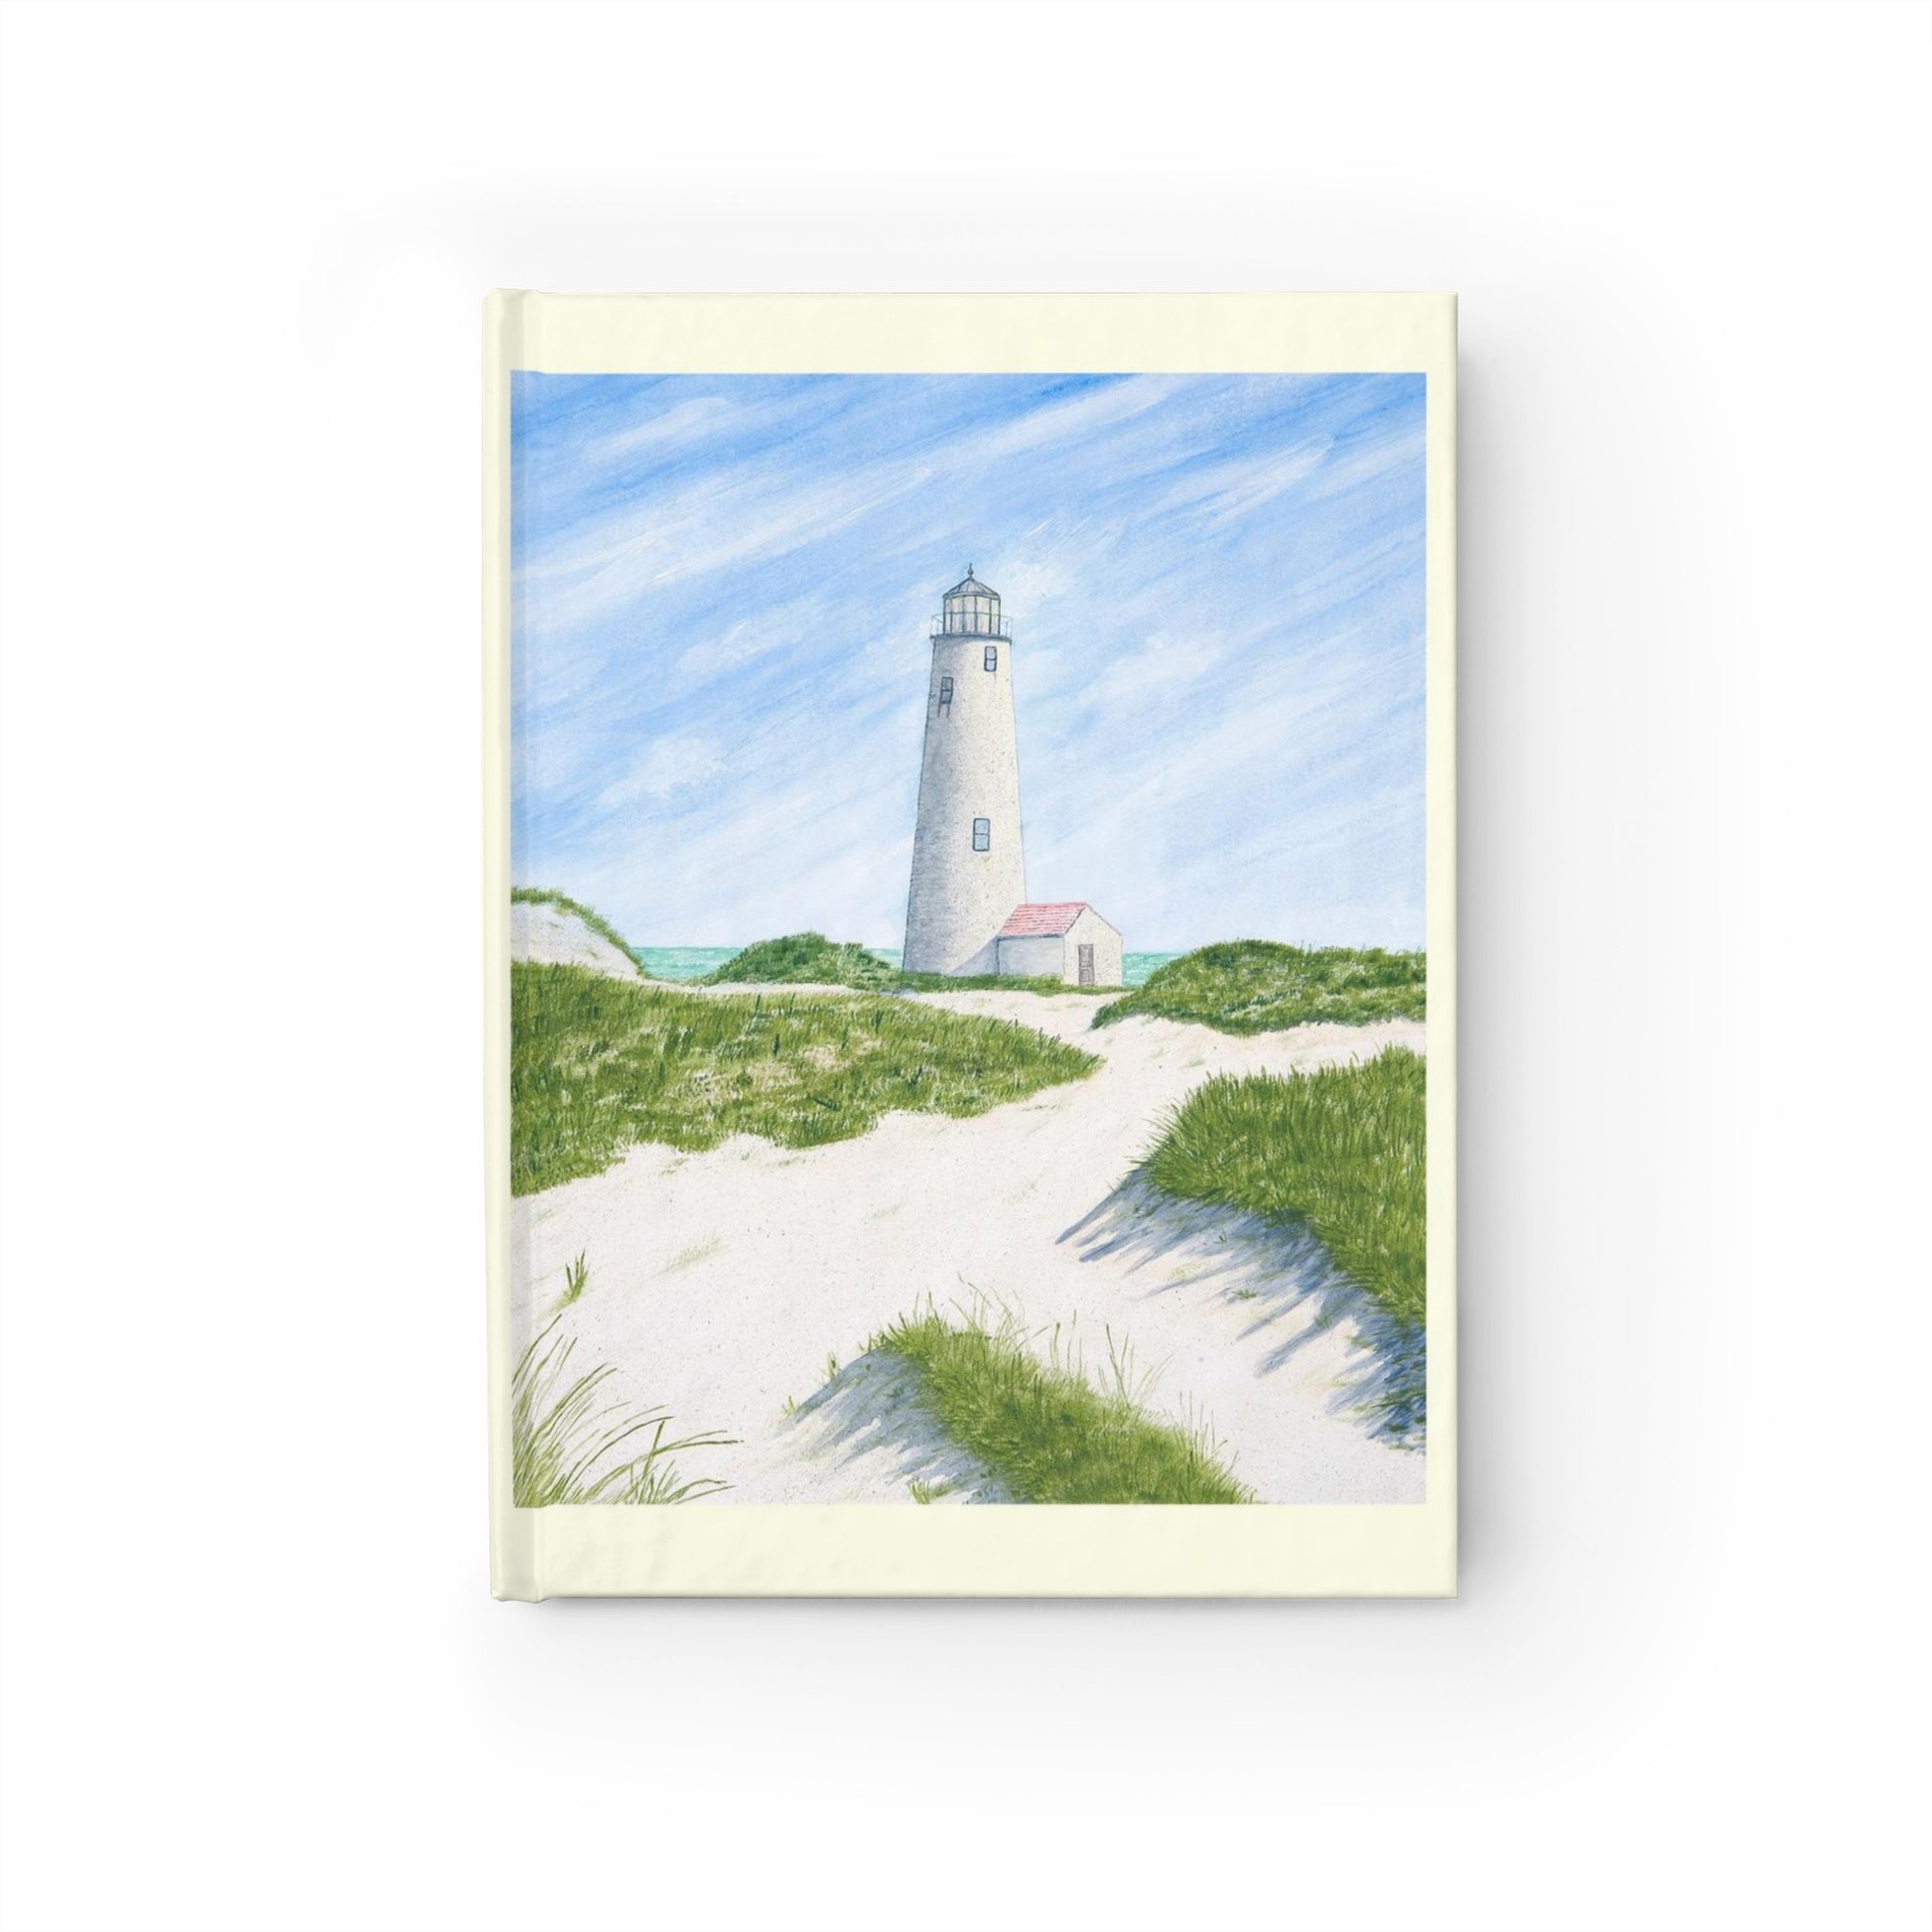 A charming Nantucket Lighthouse Journal to add a special touch to your home. Great gift for lighthouse fans!